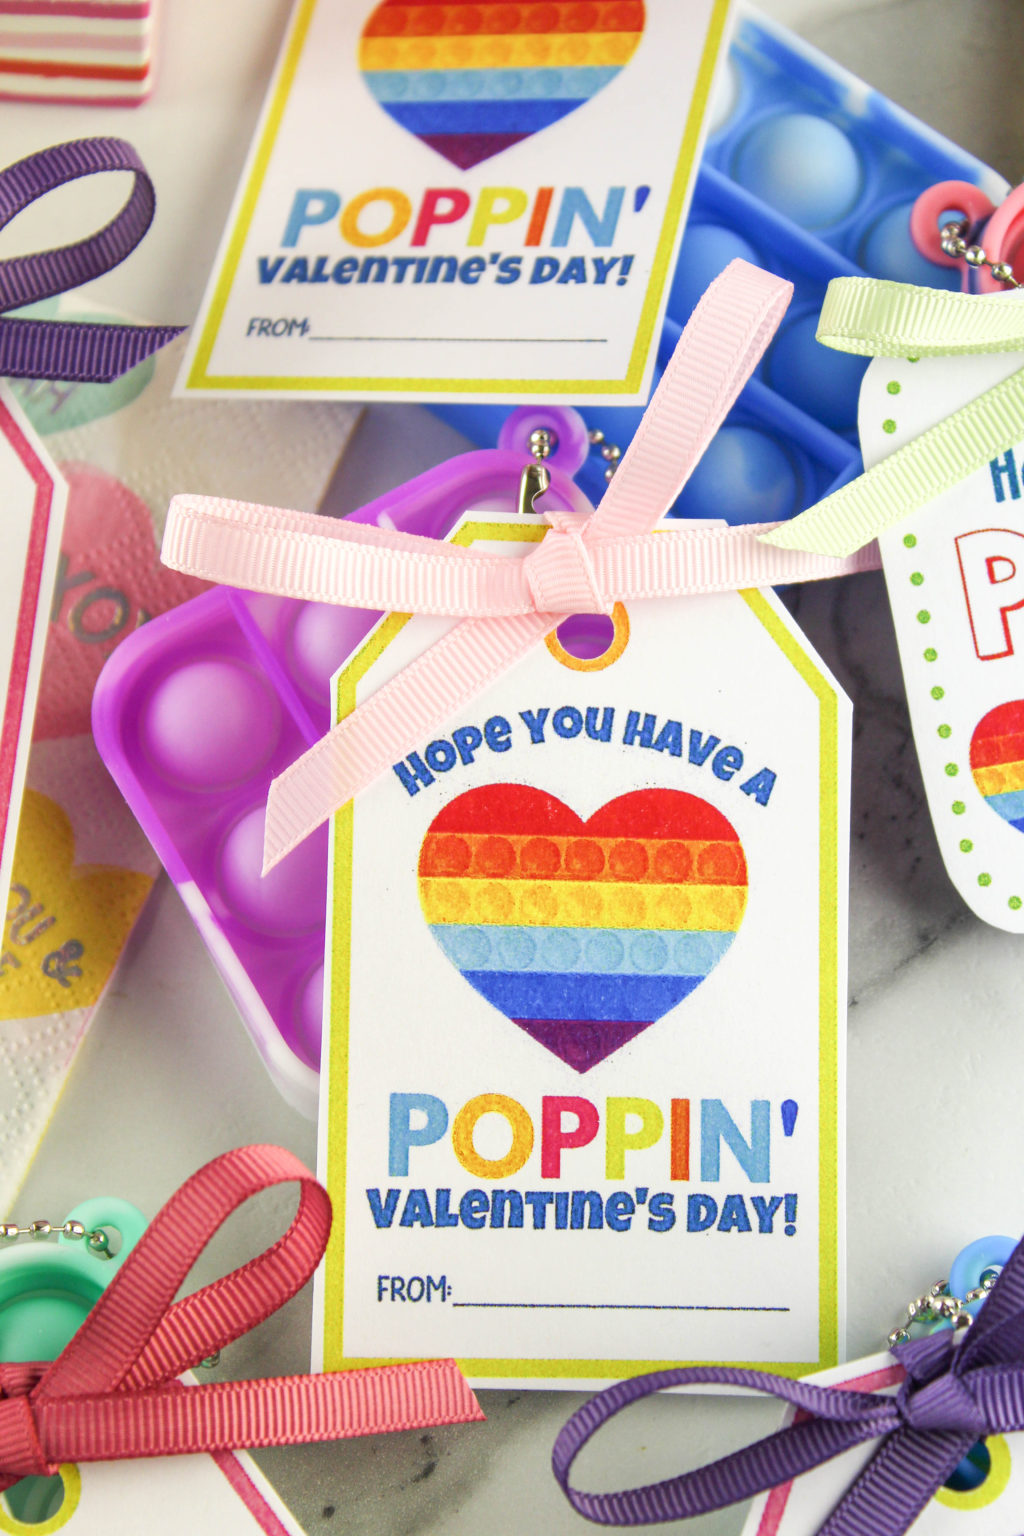 Have a Poppin’ Valentine’s Day Free Printable Baking You Happier